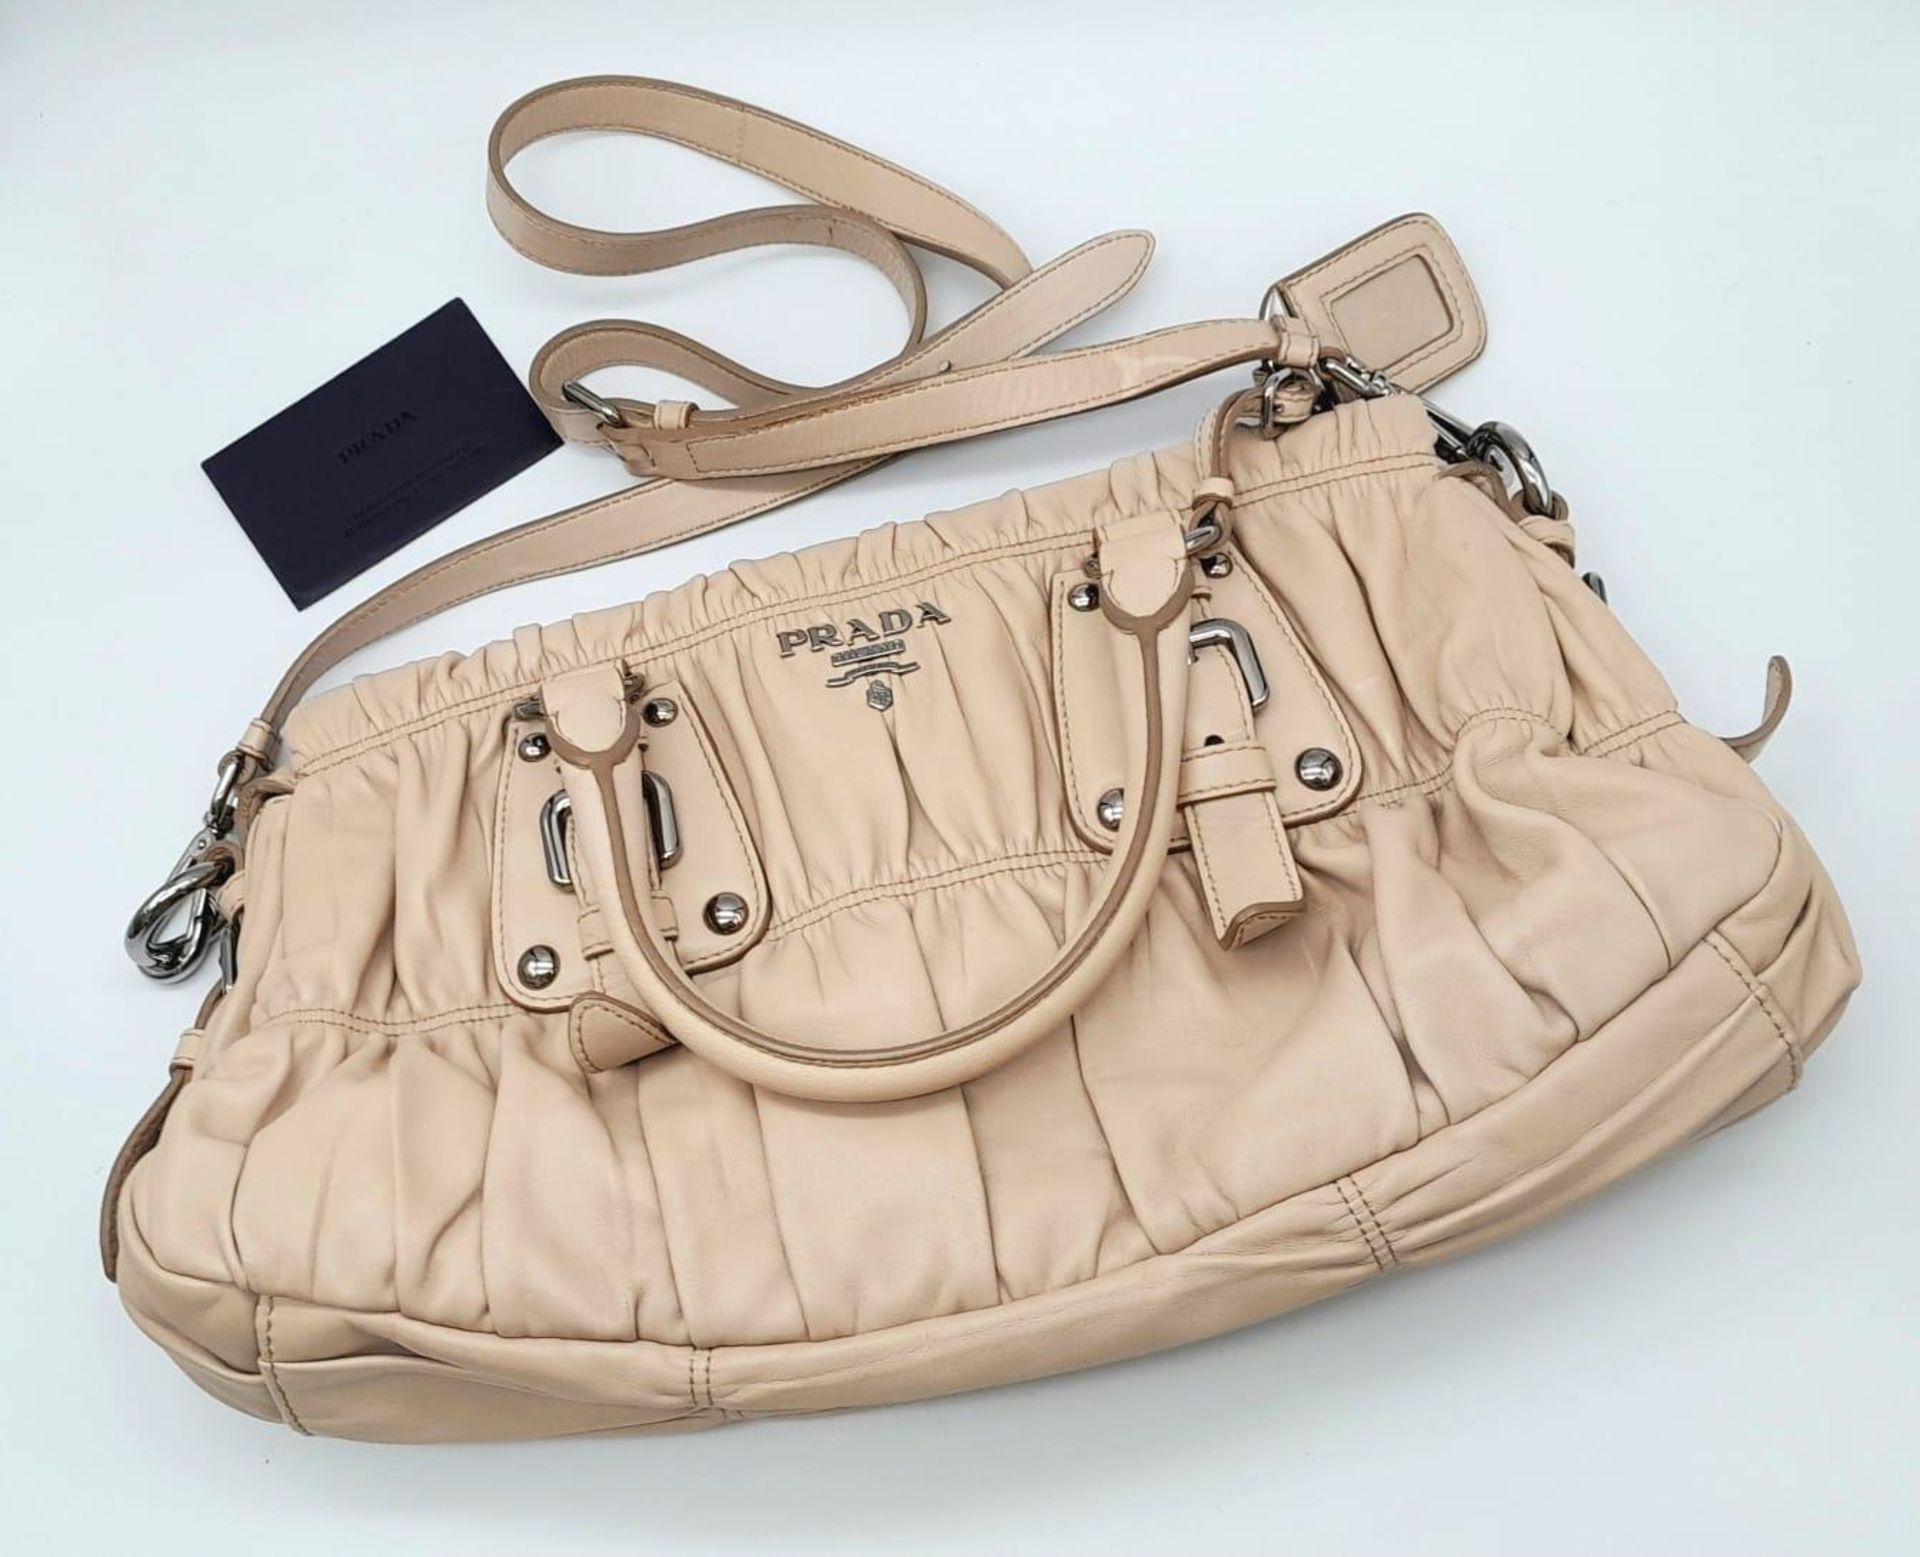 A PRADA BEIGE NAPPA LEATHER GAUFRE POMICE TOTE BAG. SILVER TONE HARD WEAR INCLUDING BUCKLE DETAIL. - Image 4 of 27